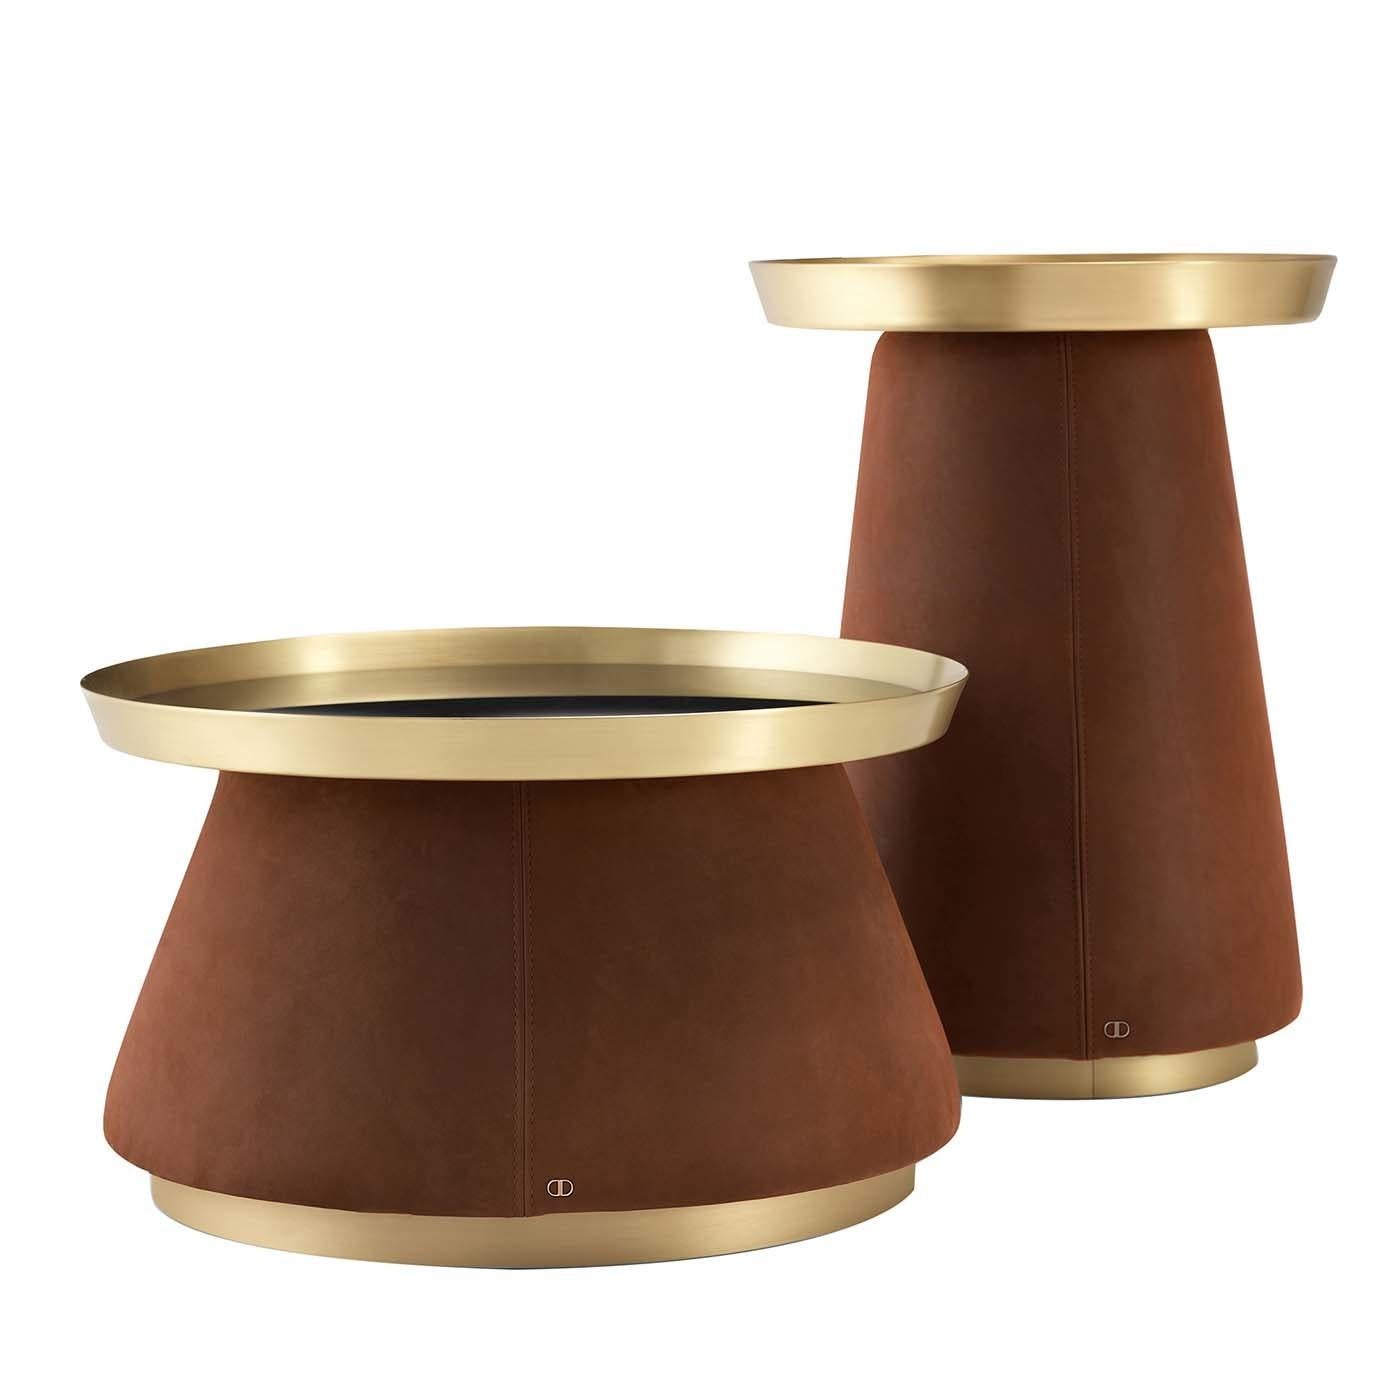 This sophisticated set of two side tables will make a statement in both a contemporary and classic interior decor. This set comprises a tall table (ø 45 x h 60 cm) and a short, larger one (ø 60 x h 35 cm), each featuring a multilayered wooden base